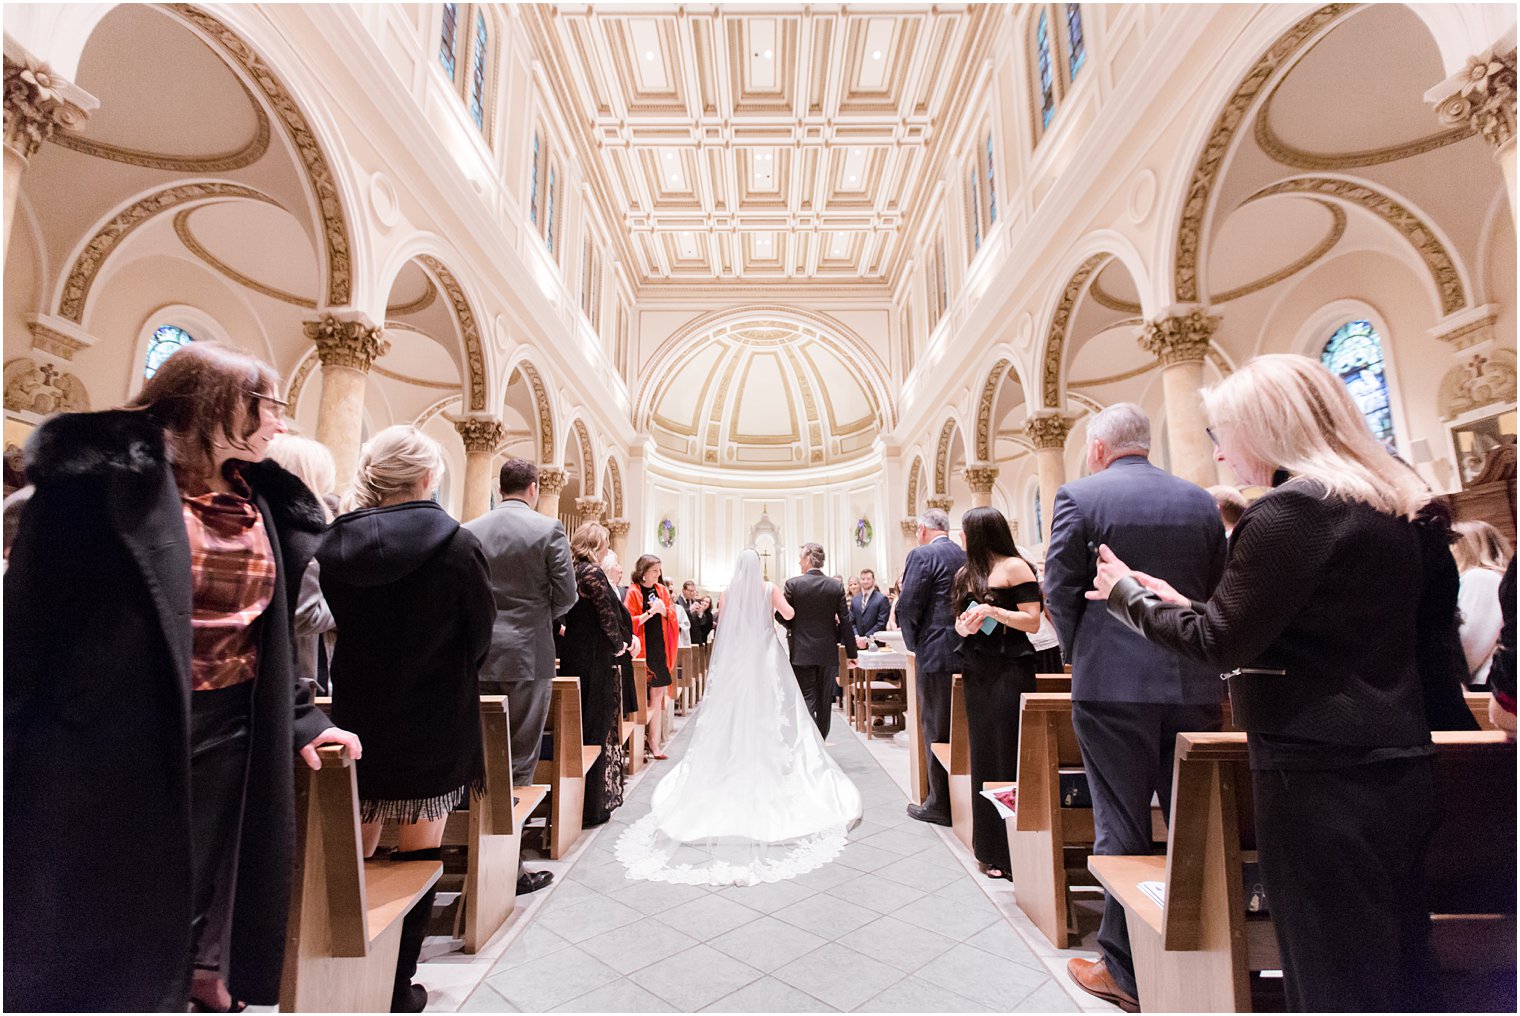 church wedding ceremony at Church of the Immaculate Conception in Montclair, NJ